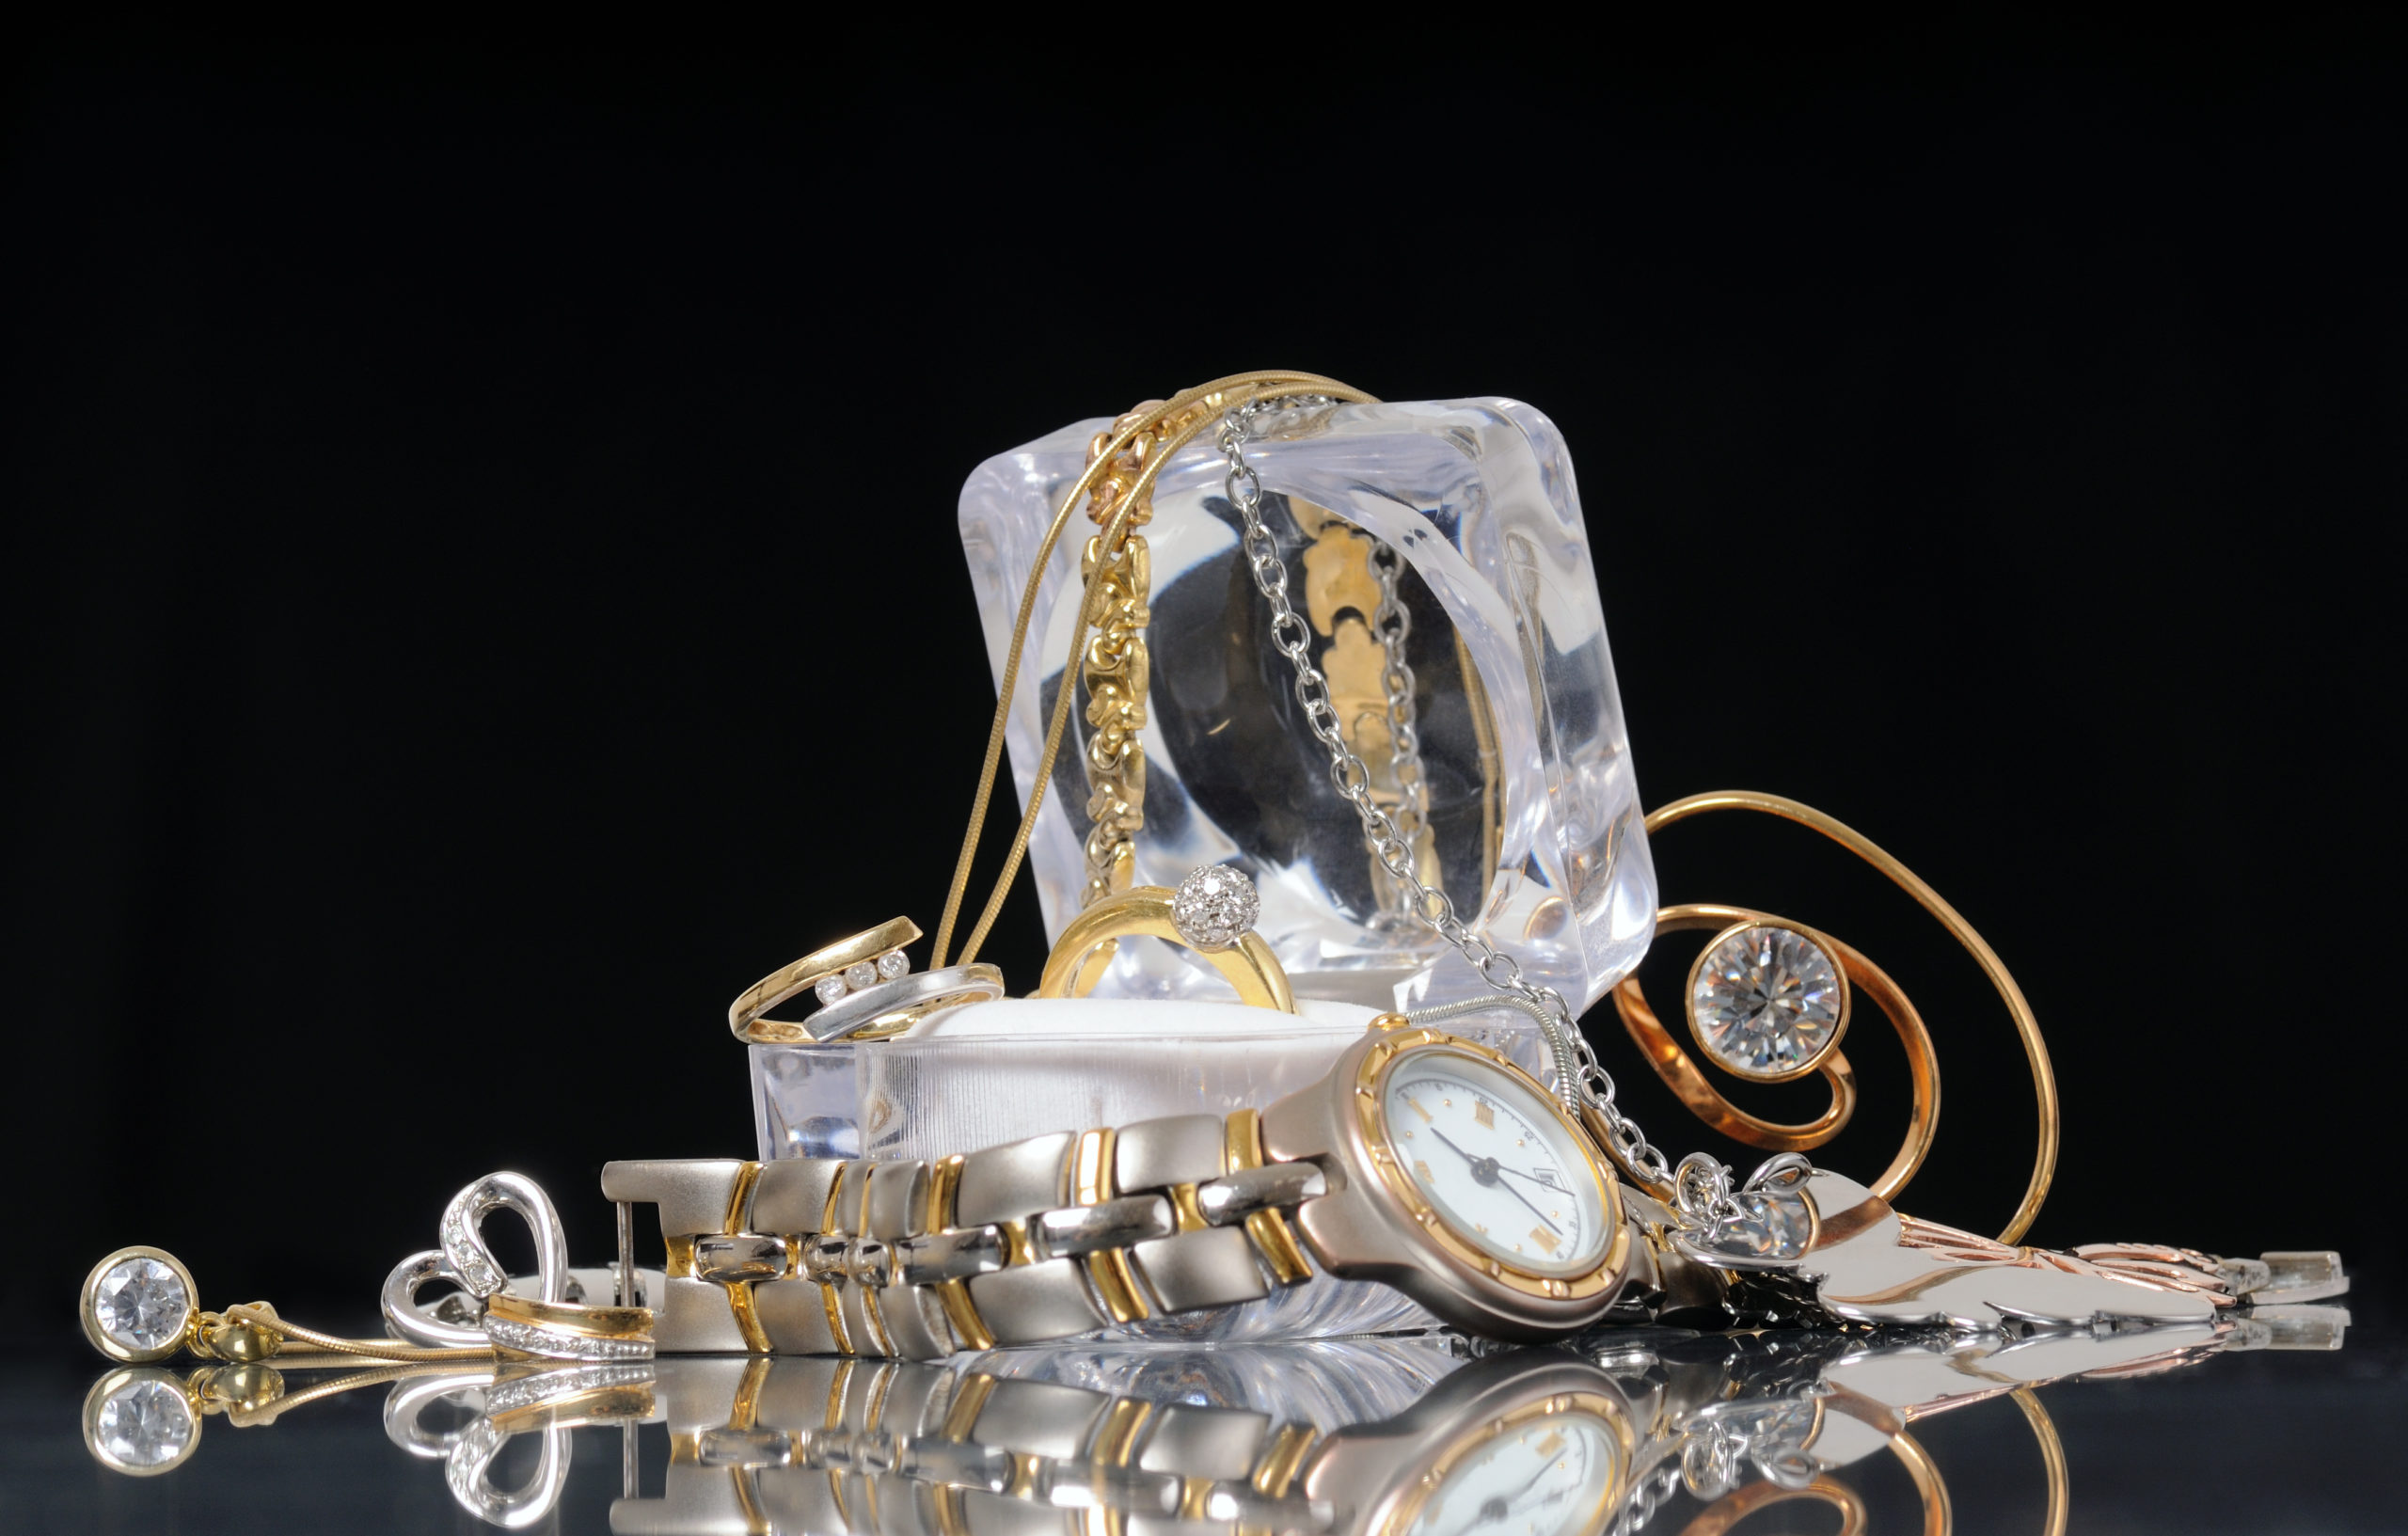 Silver & Gold Jewelry | Swiss Gift Shop | Highland IL